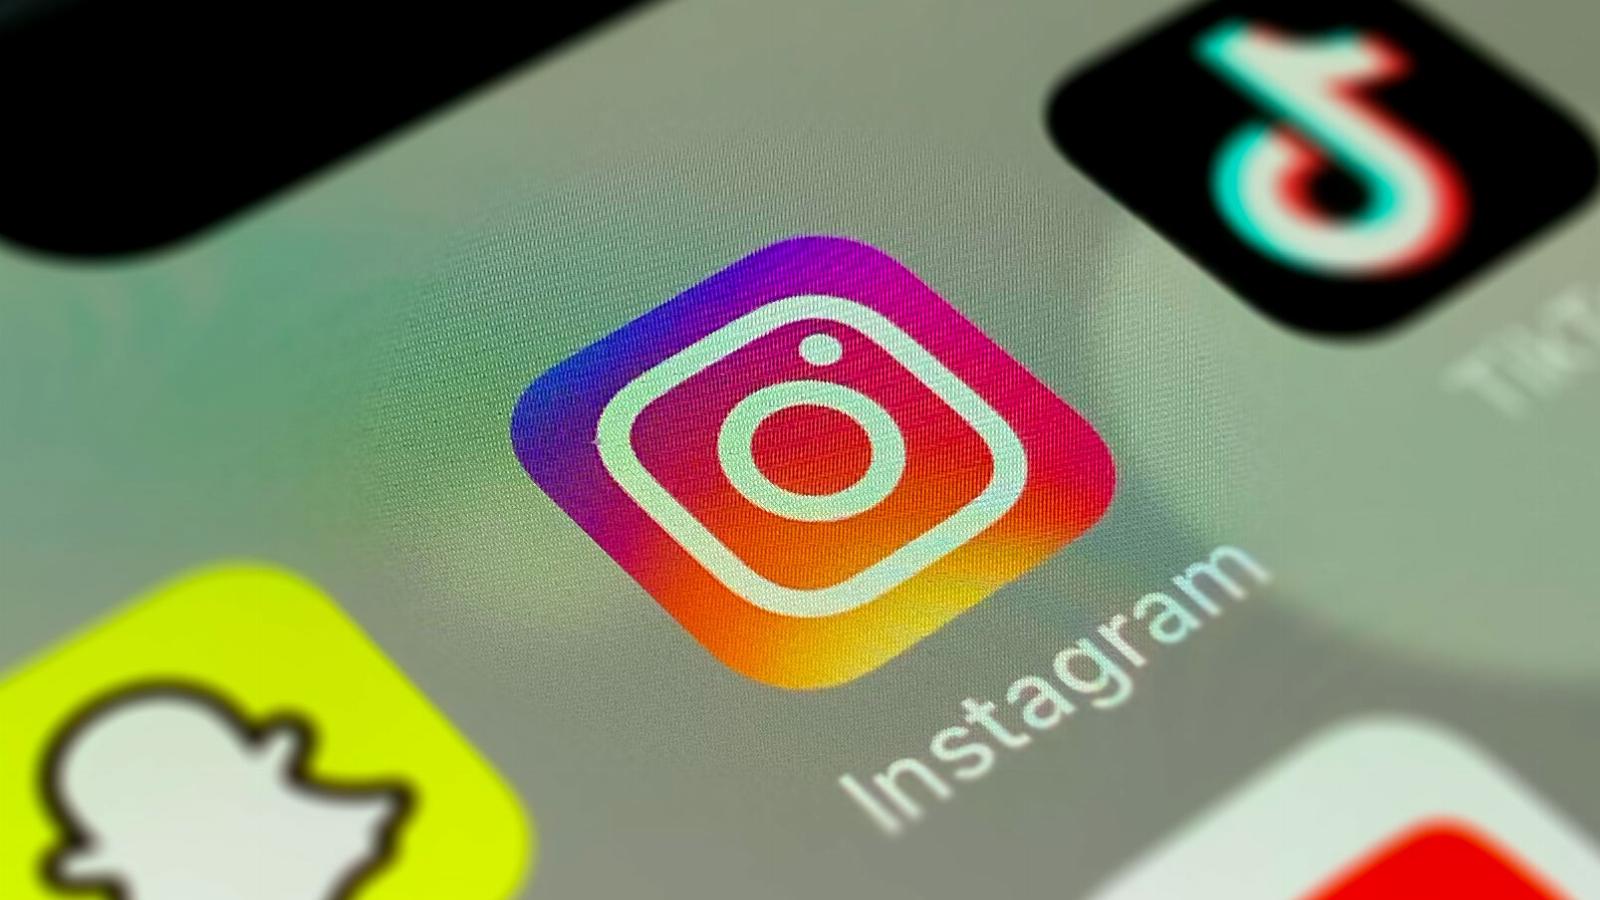 Instagram is developing ‘Blend,’ recommended Reels for you and a friend